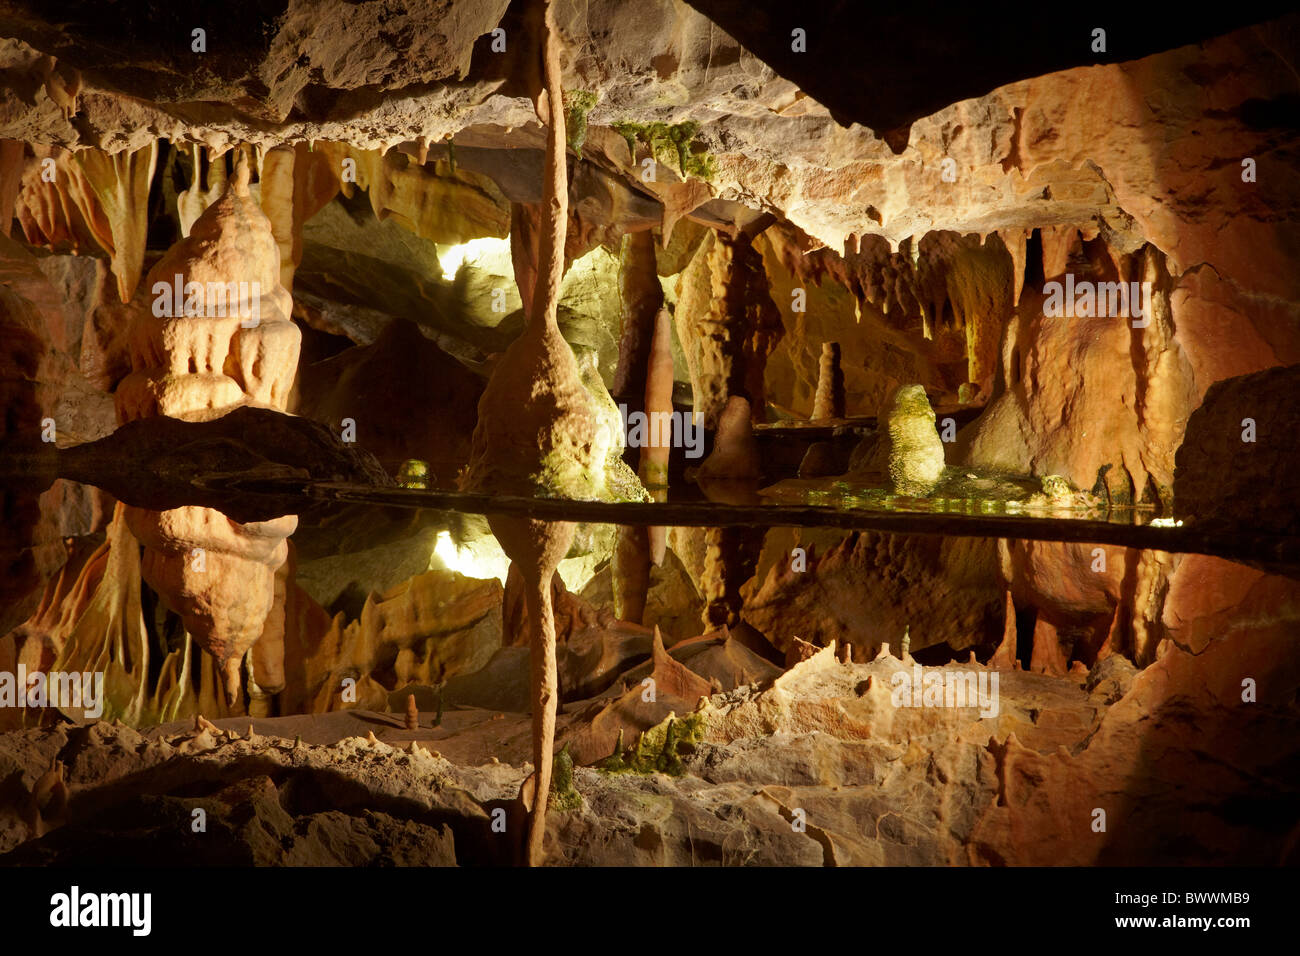 Stalactites and stalagmites reflected in pool, Cox's Cave, Cheddar Caves, Somerset, England, United Kingdom Stock Photo